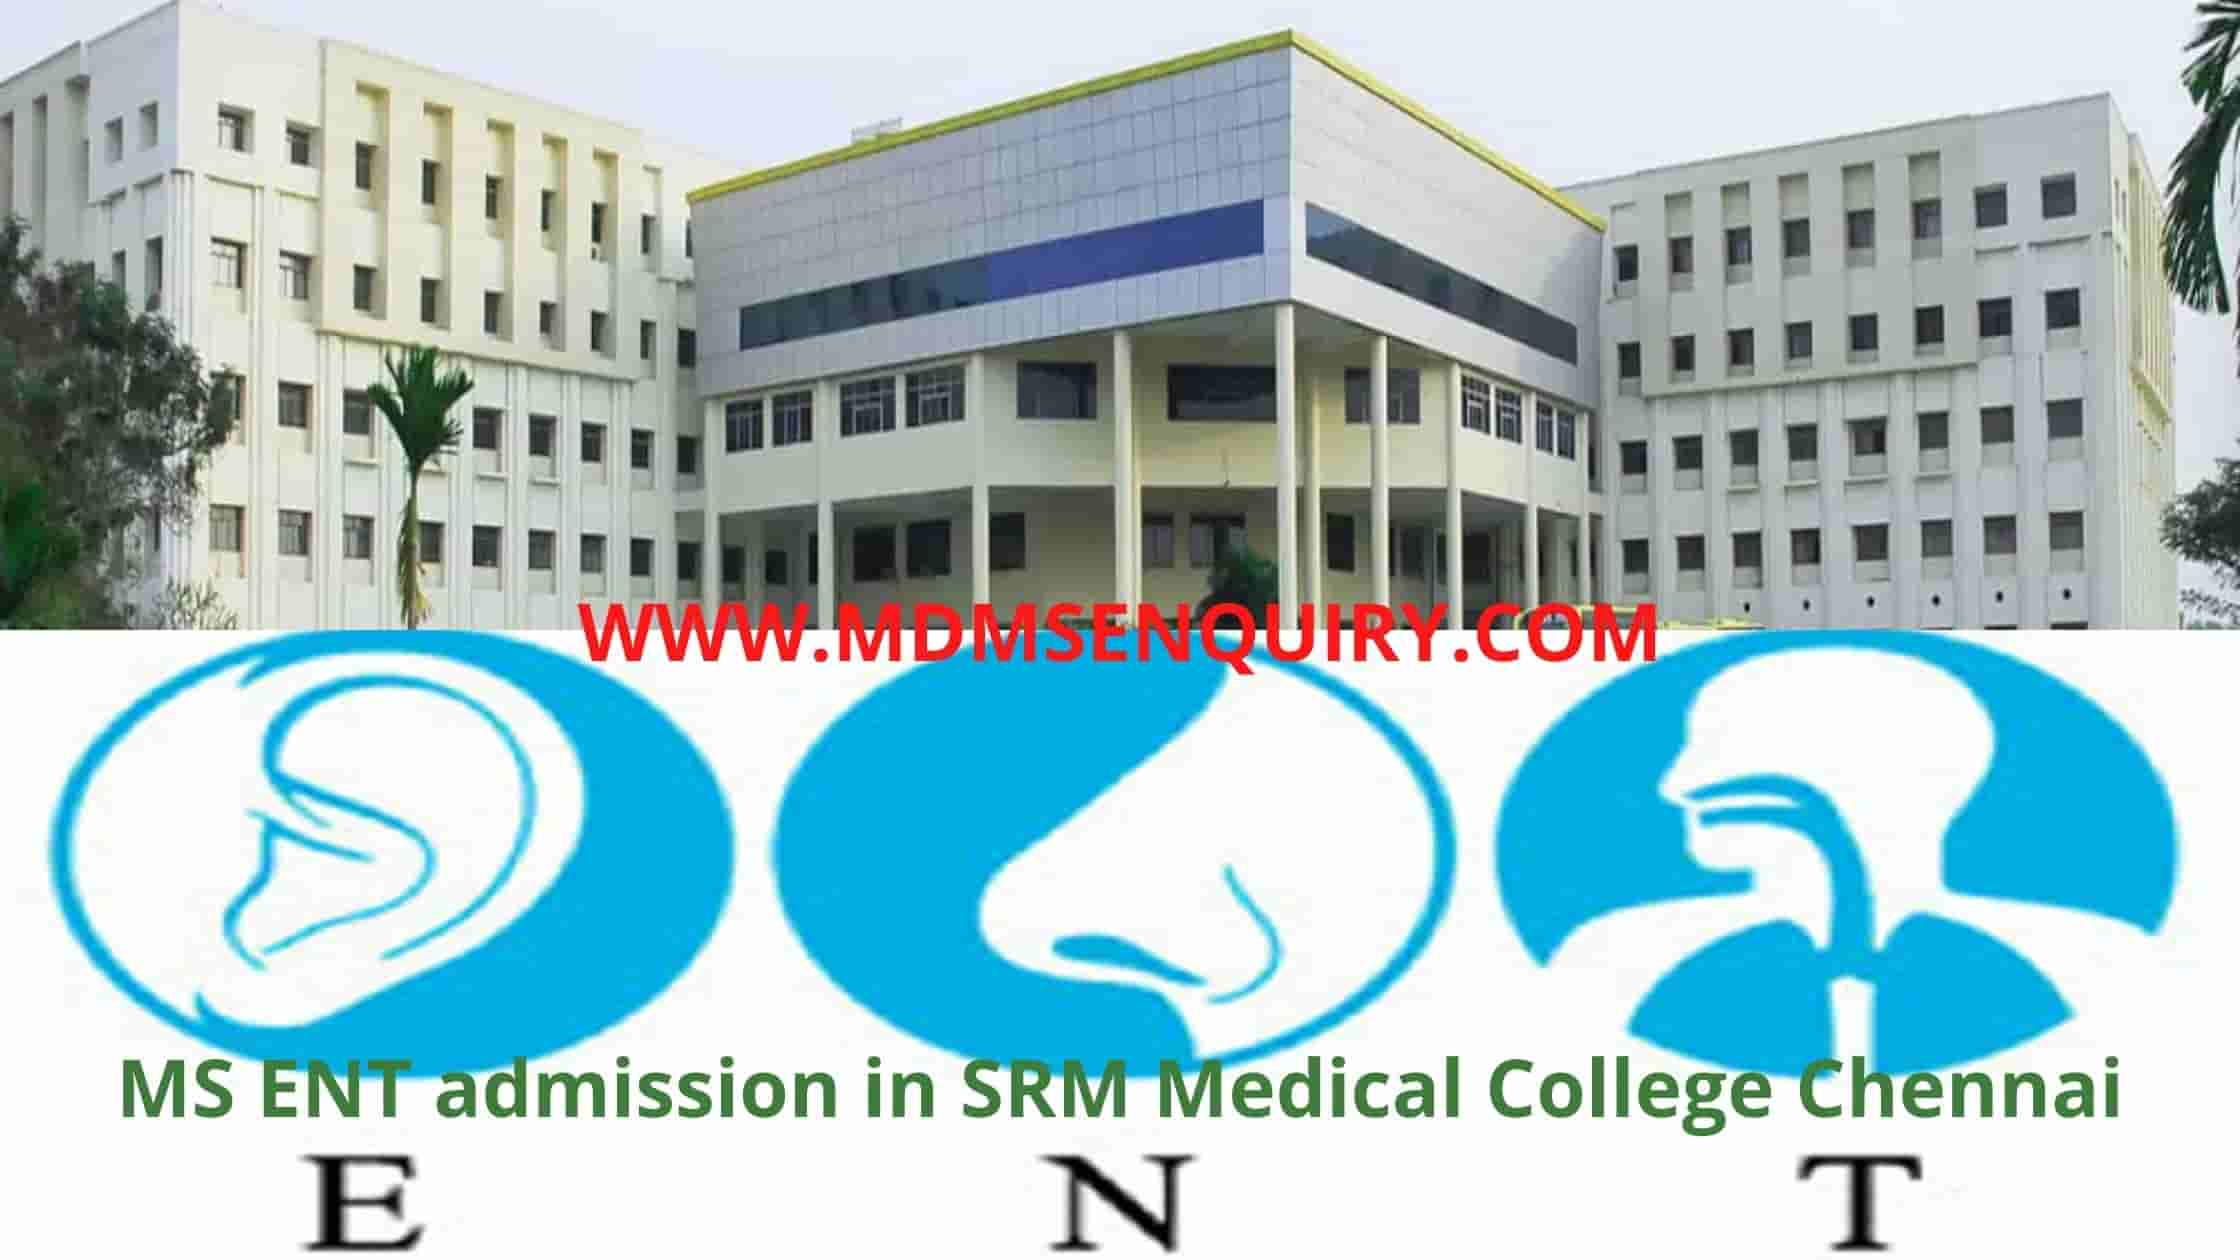 MS ENT Admission in SRM Medical College Chennai